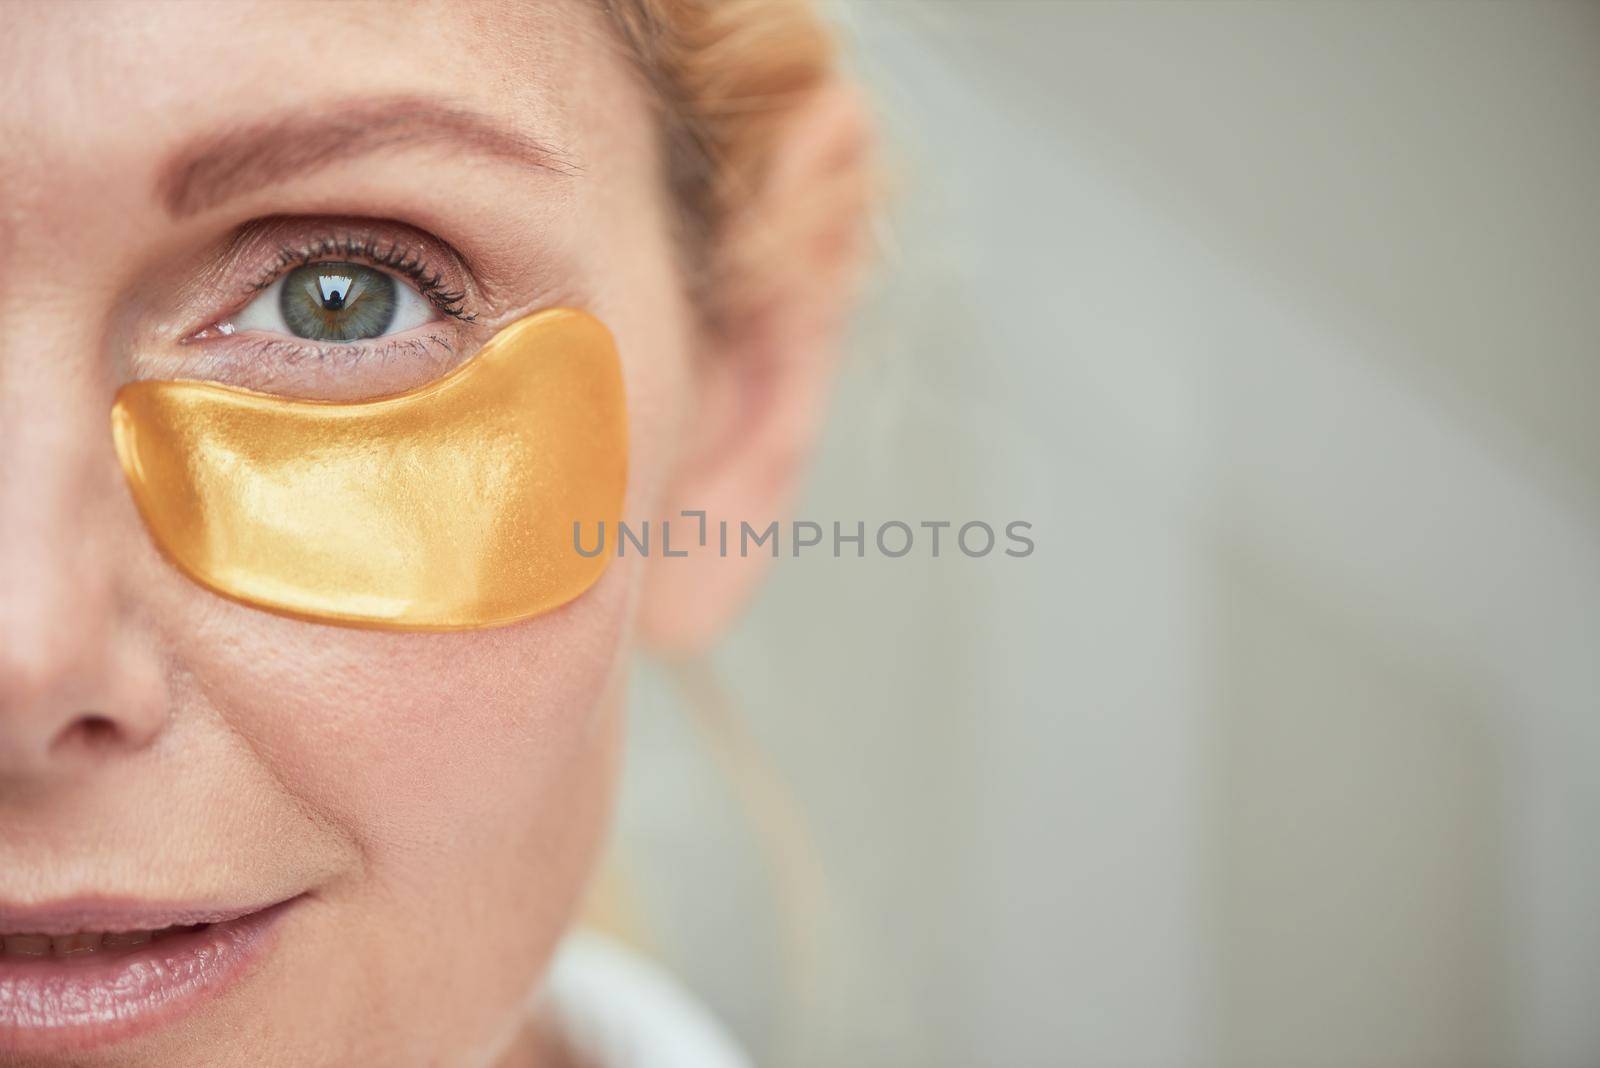 Under eye patch on smiling middle aged caucasian woman face, selective focus. Beauty, skincare and cosmetology concept